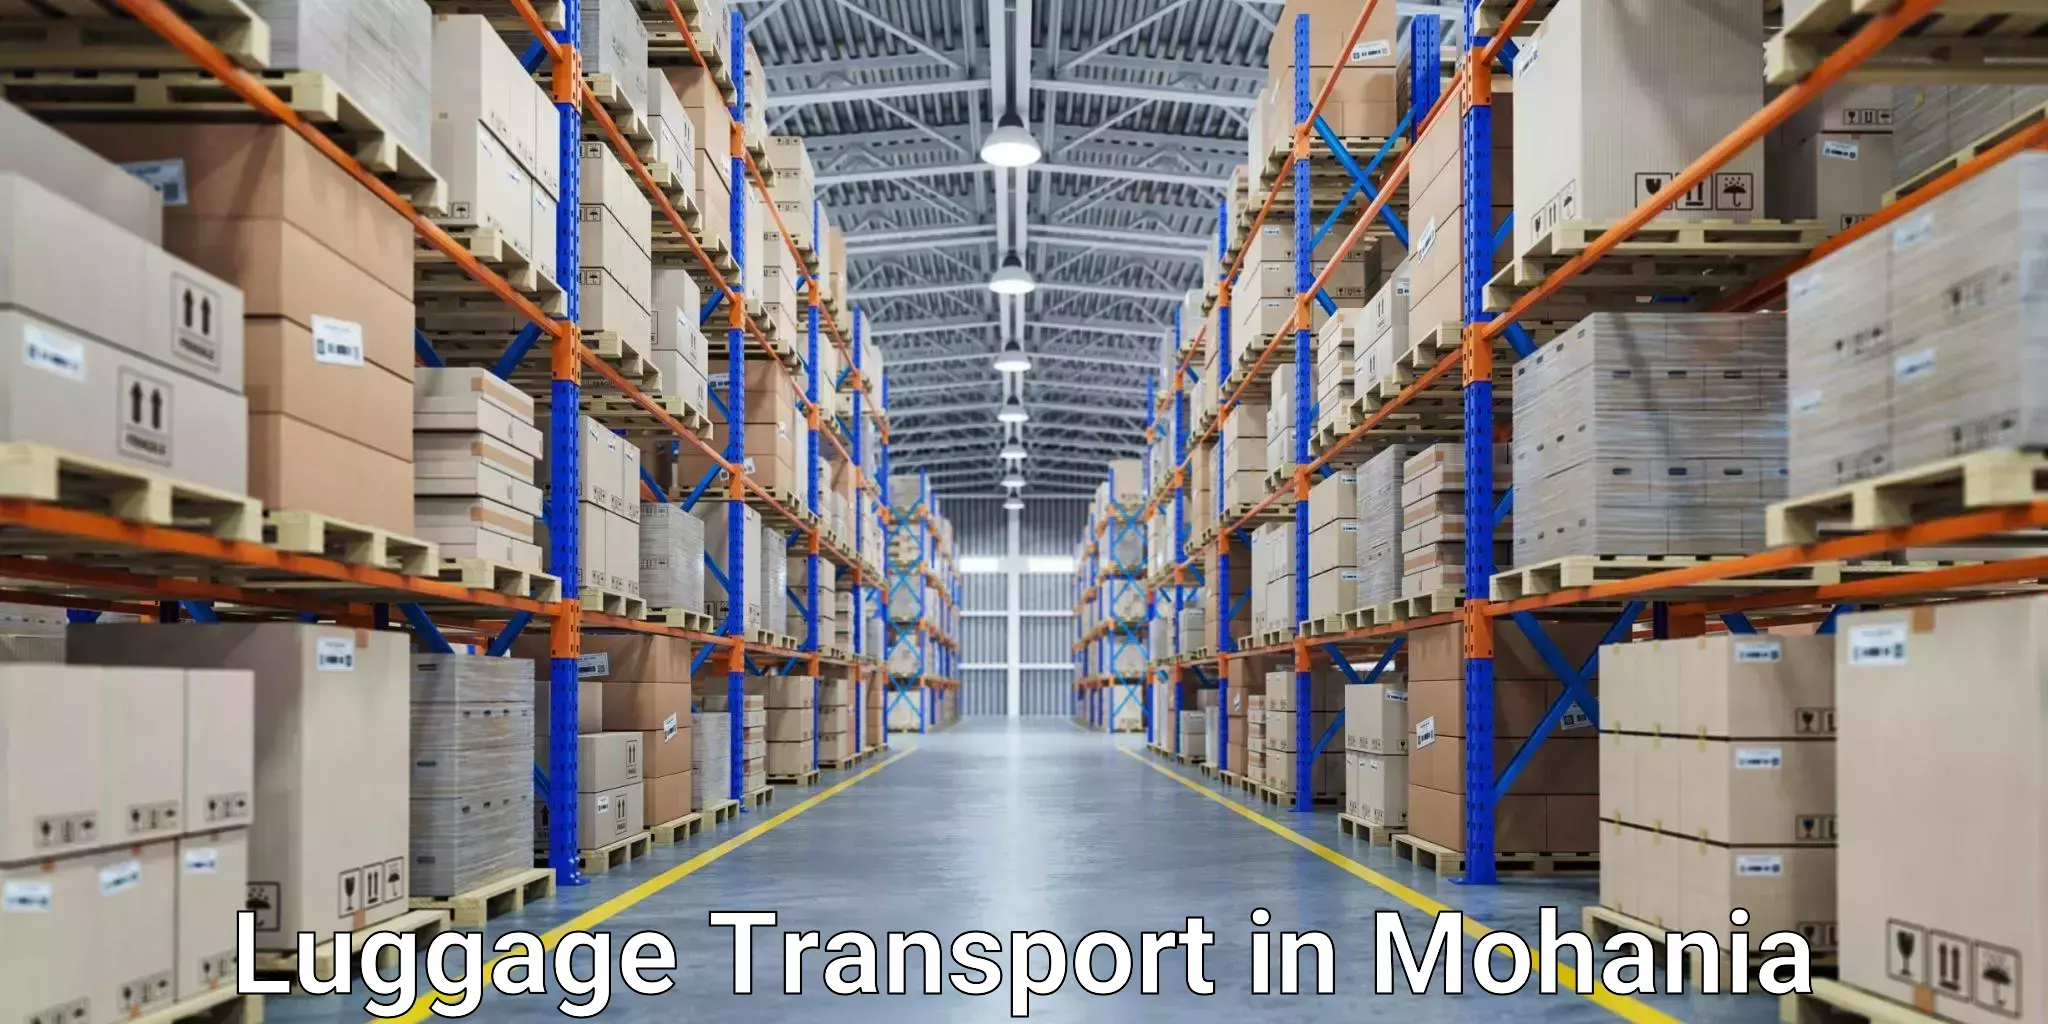 Luggage transport rates in Mohania